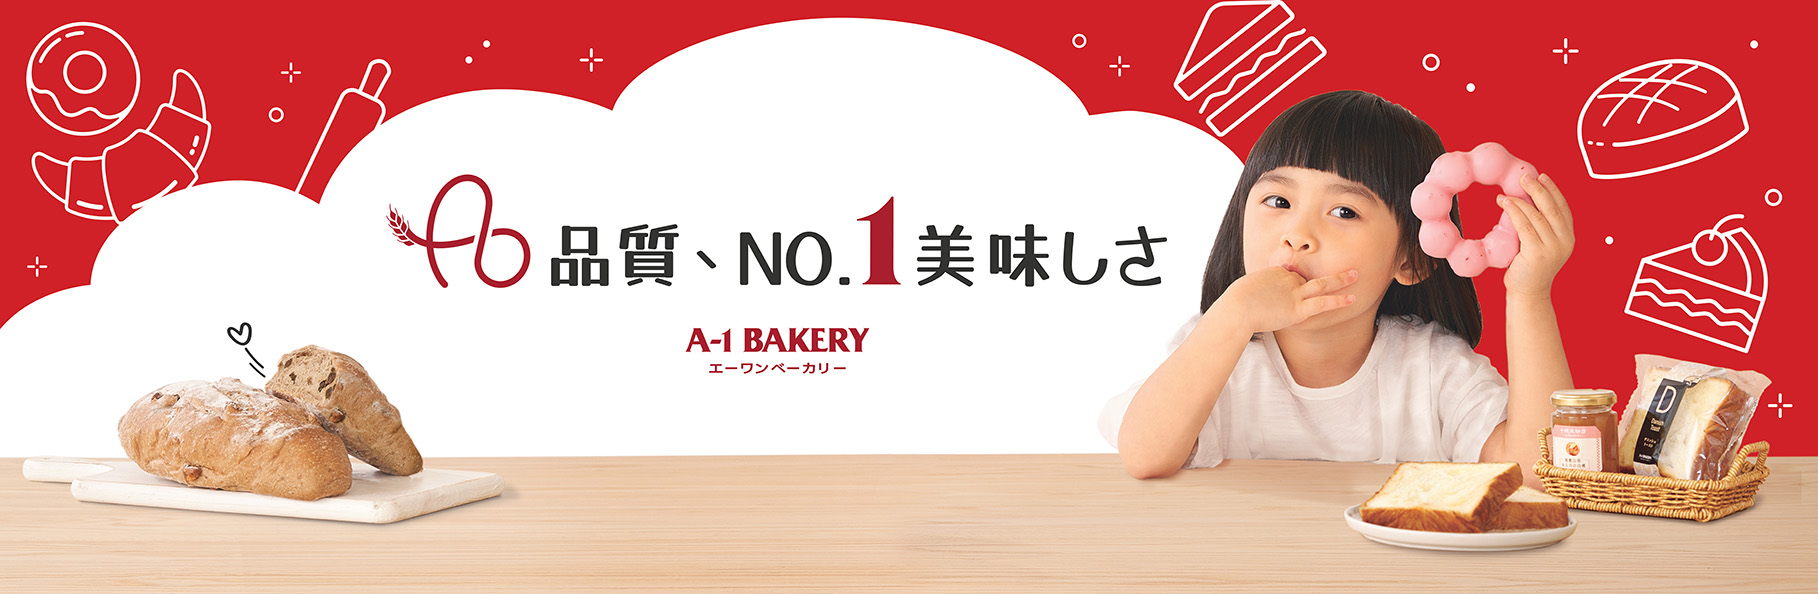 About A-1 BAKERY | Natural, Healthy and Delicious.